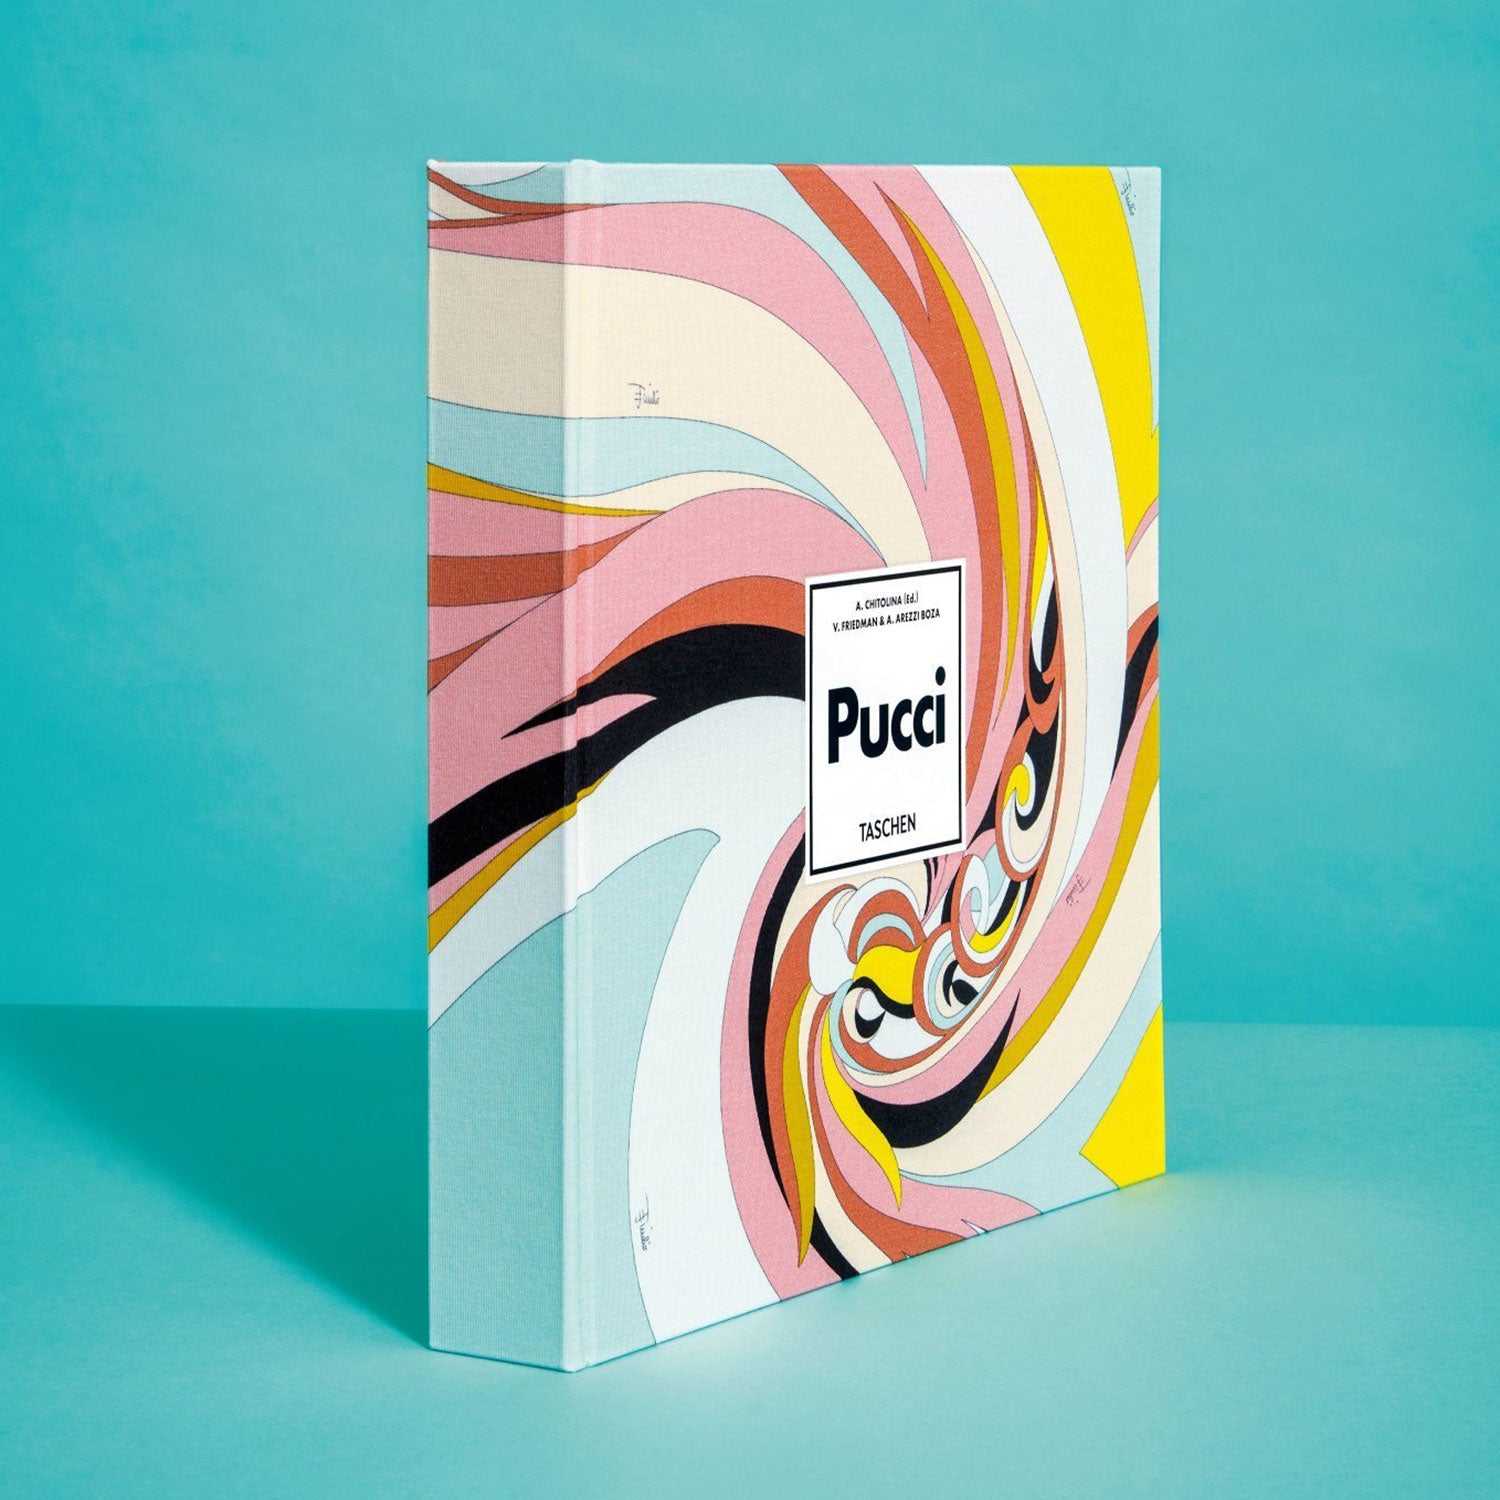 pucci updated limited edition hardcover book taschen at secret location